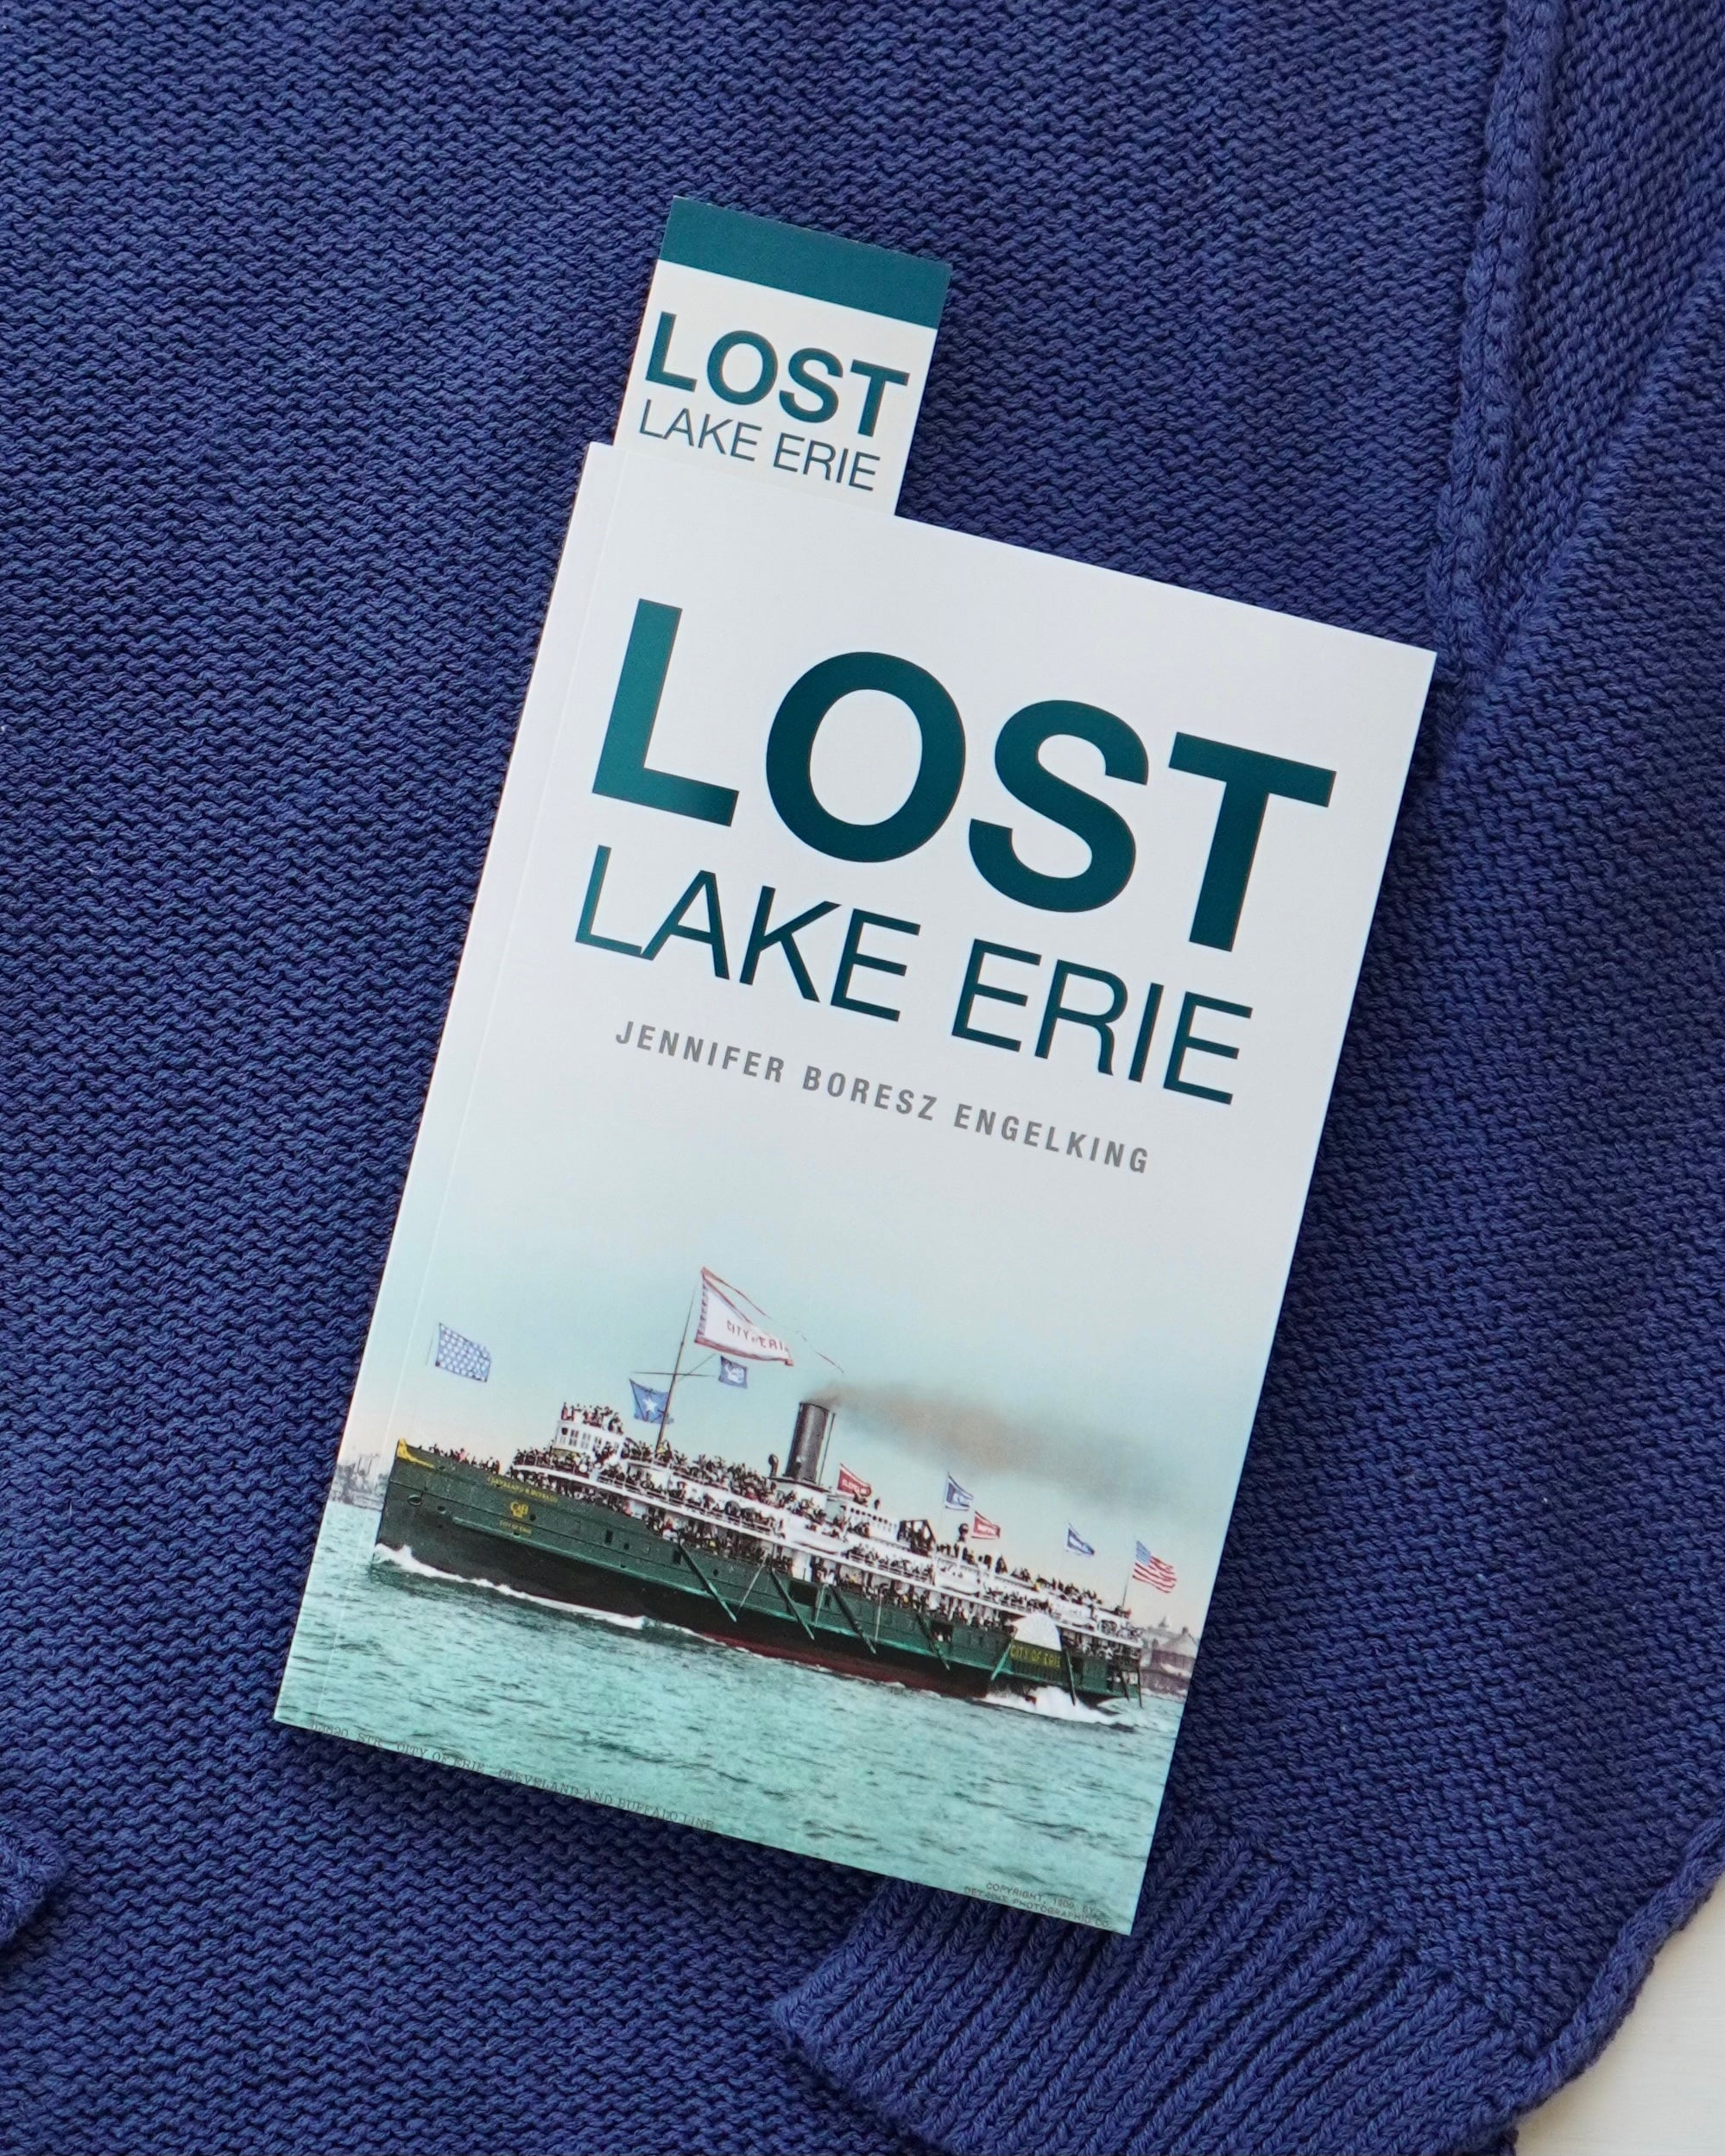 “Lost Lake Erie” Signed Book